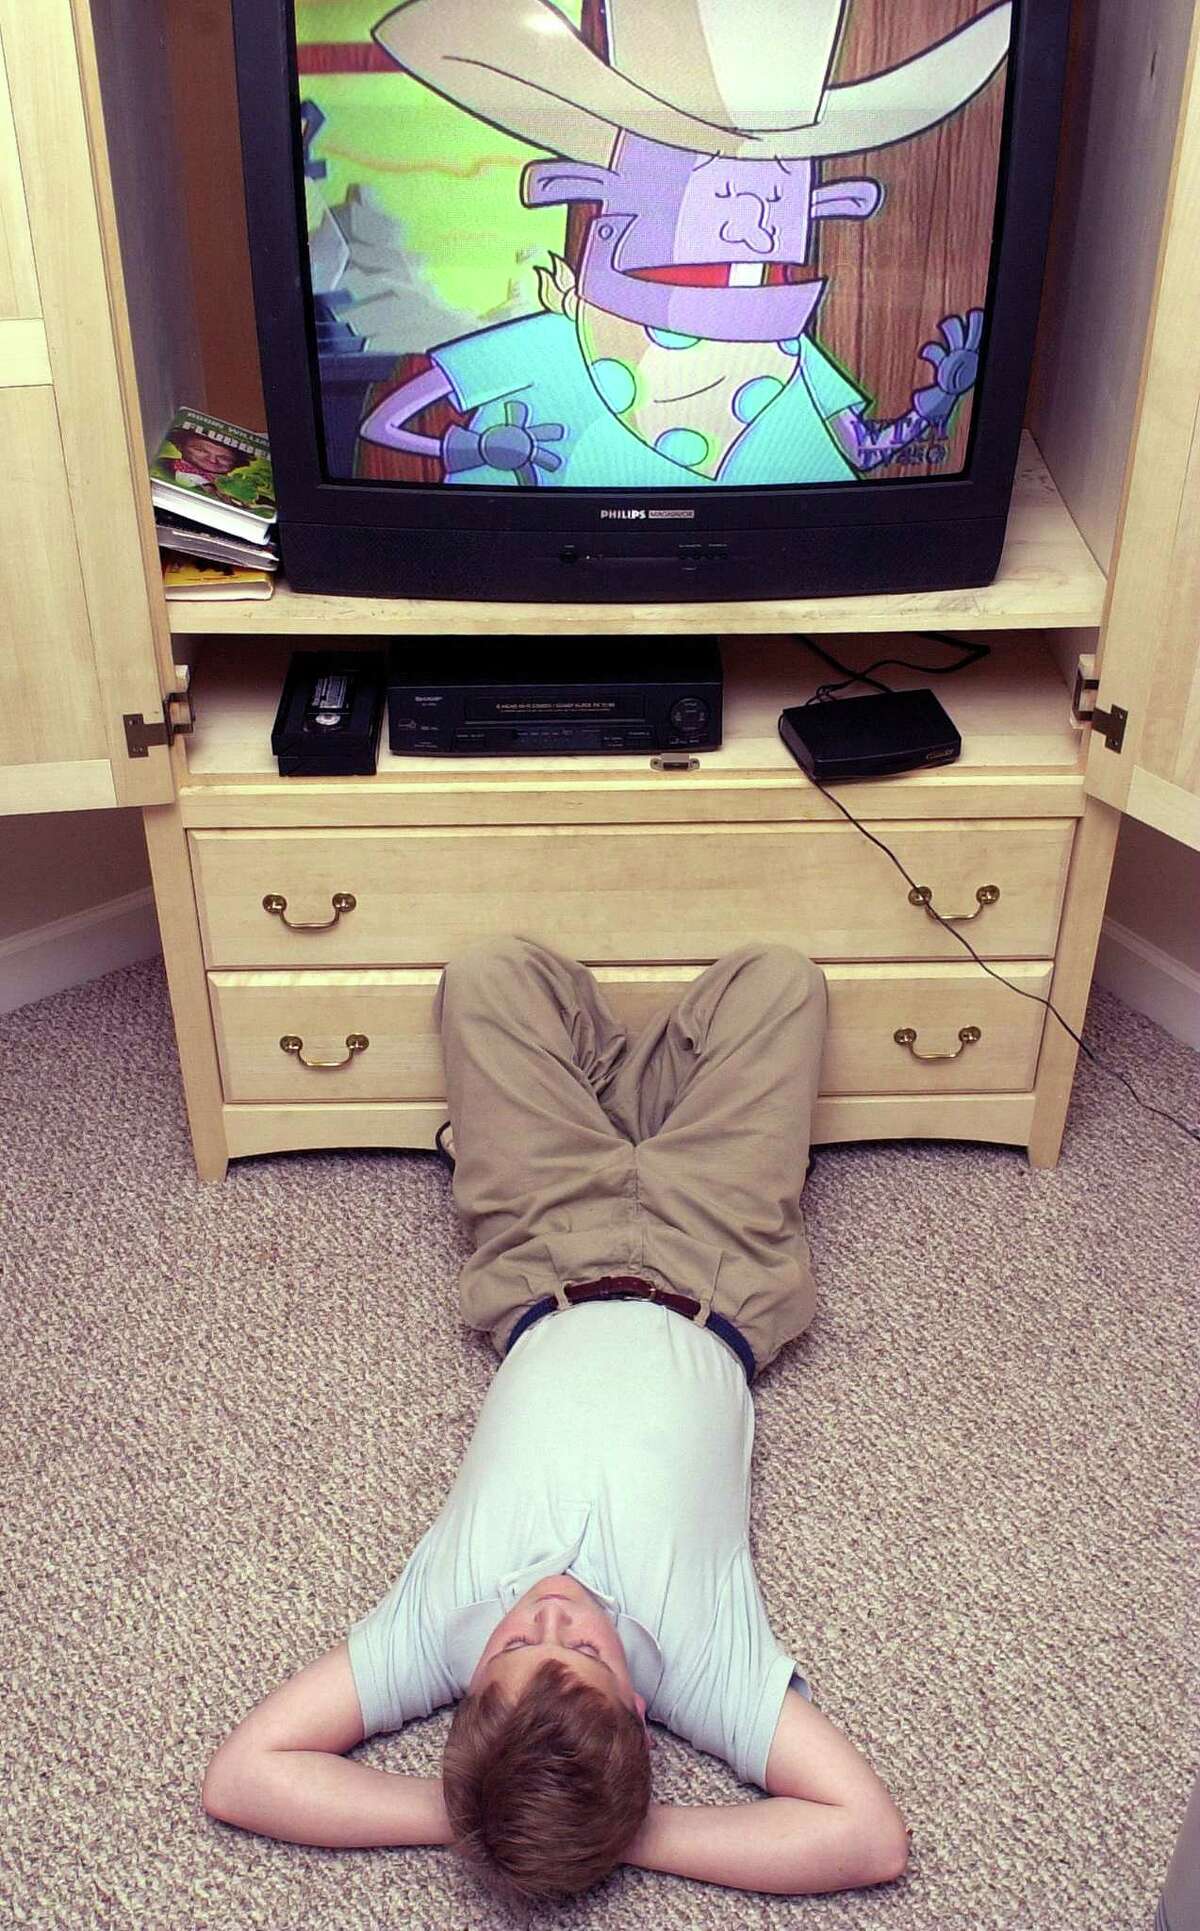 Spencer Renfrow watches television in his Chattanooga, Tenn., home Monday, April 8, 2002. Rebekah Renfrow purchased a ProtecTV box to filter profanity and other selected words from television programs. (AP Photo/Angela Lewis)